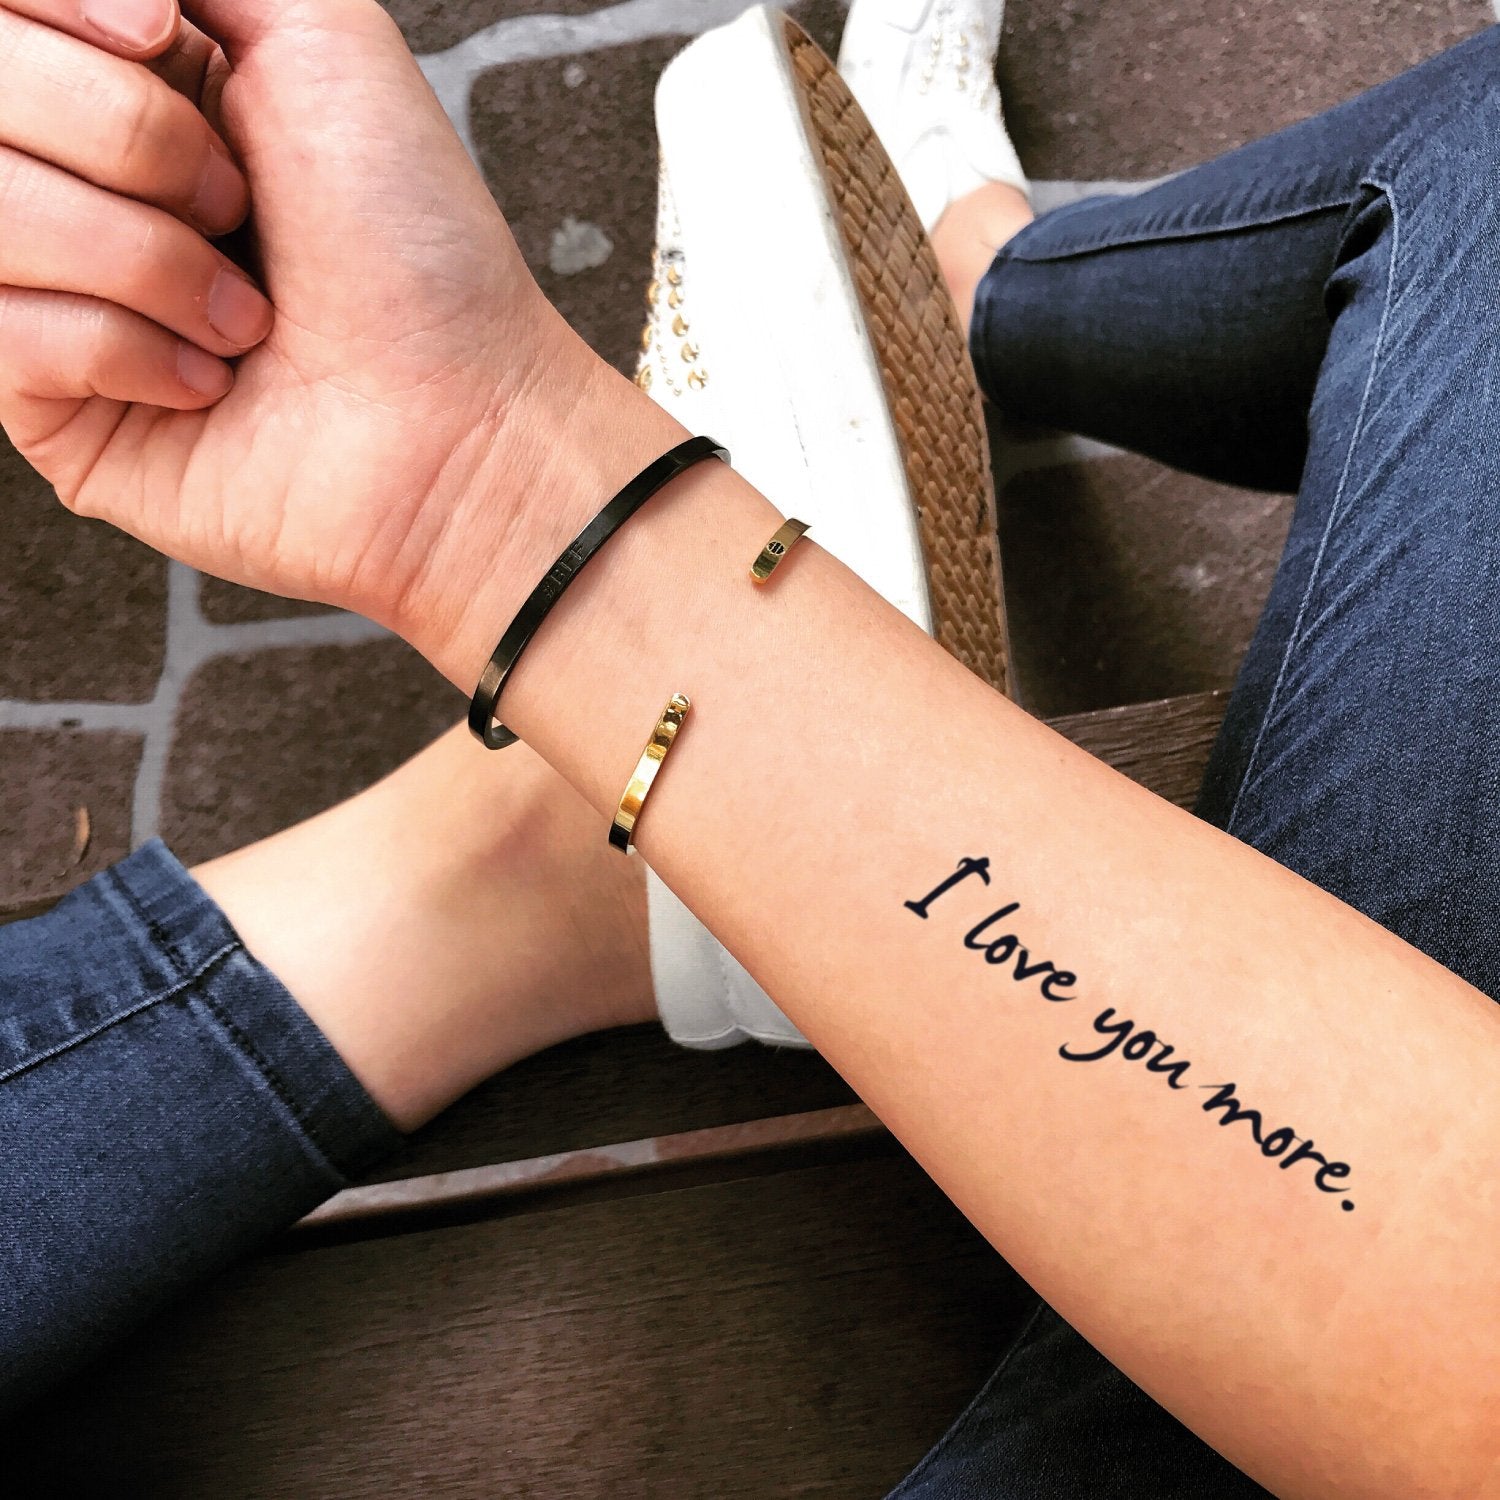 40 Empowering Selflove Tattoos And Meaning  Our Mindful Life